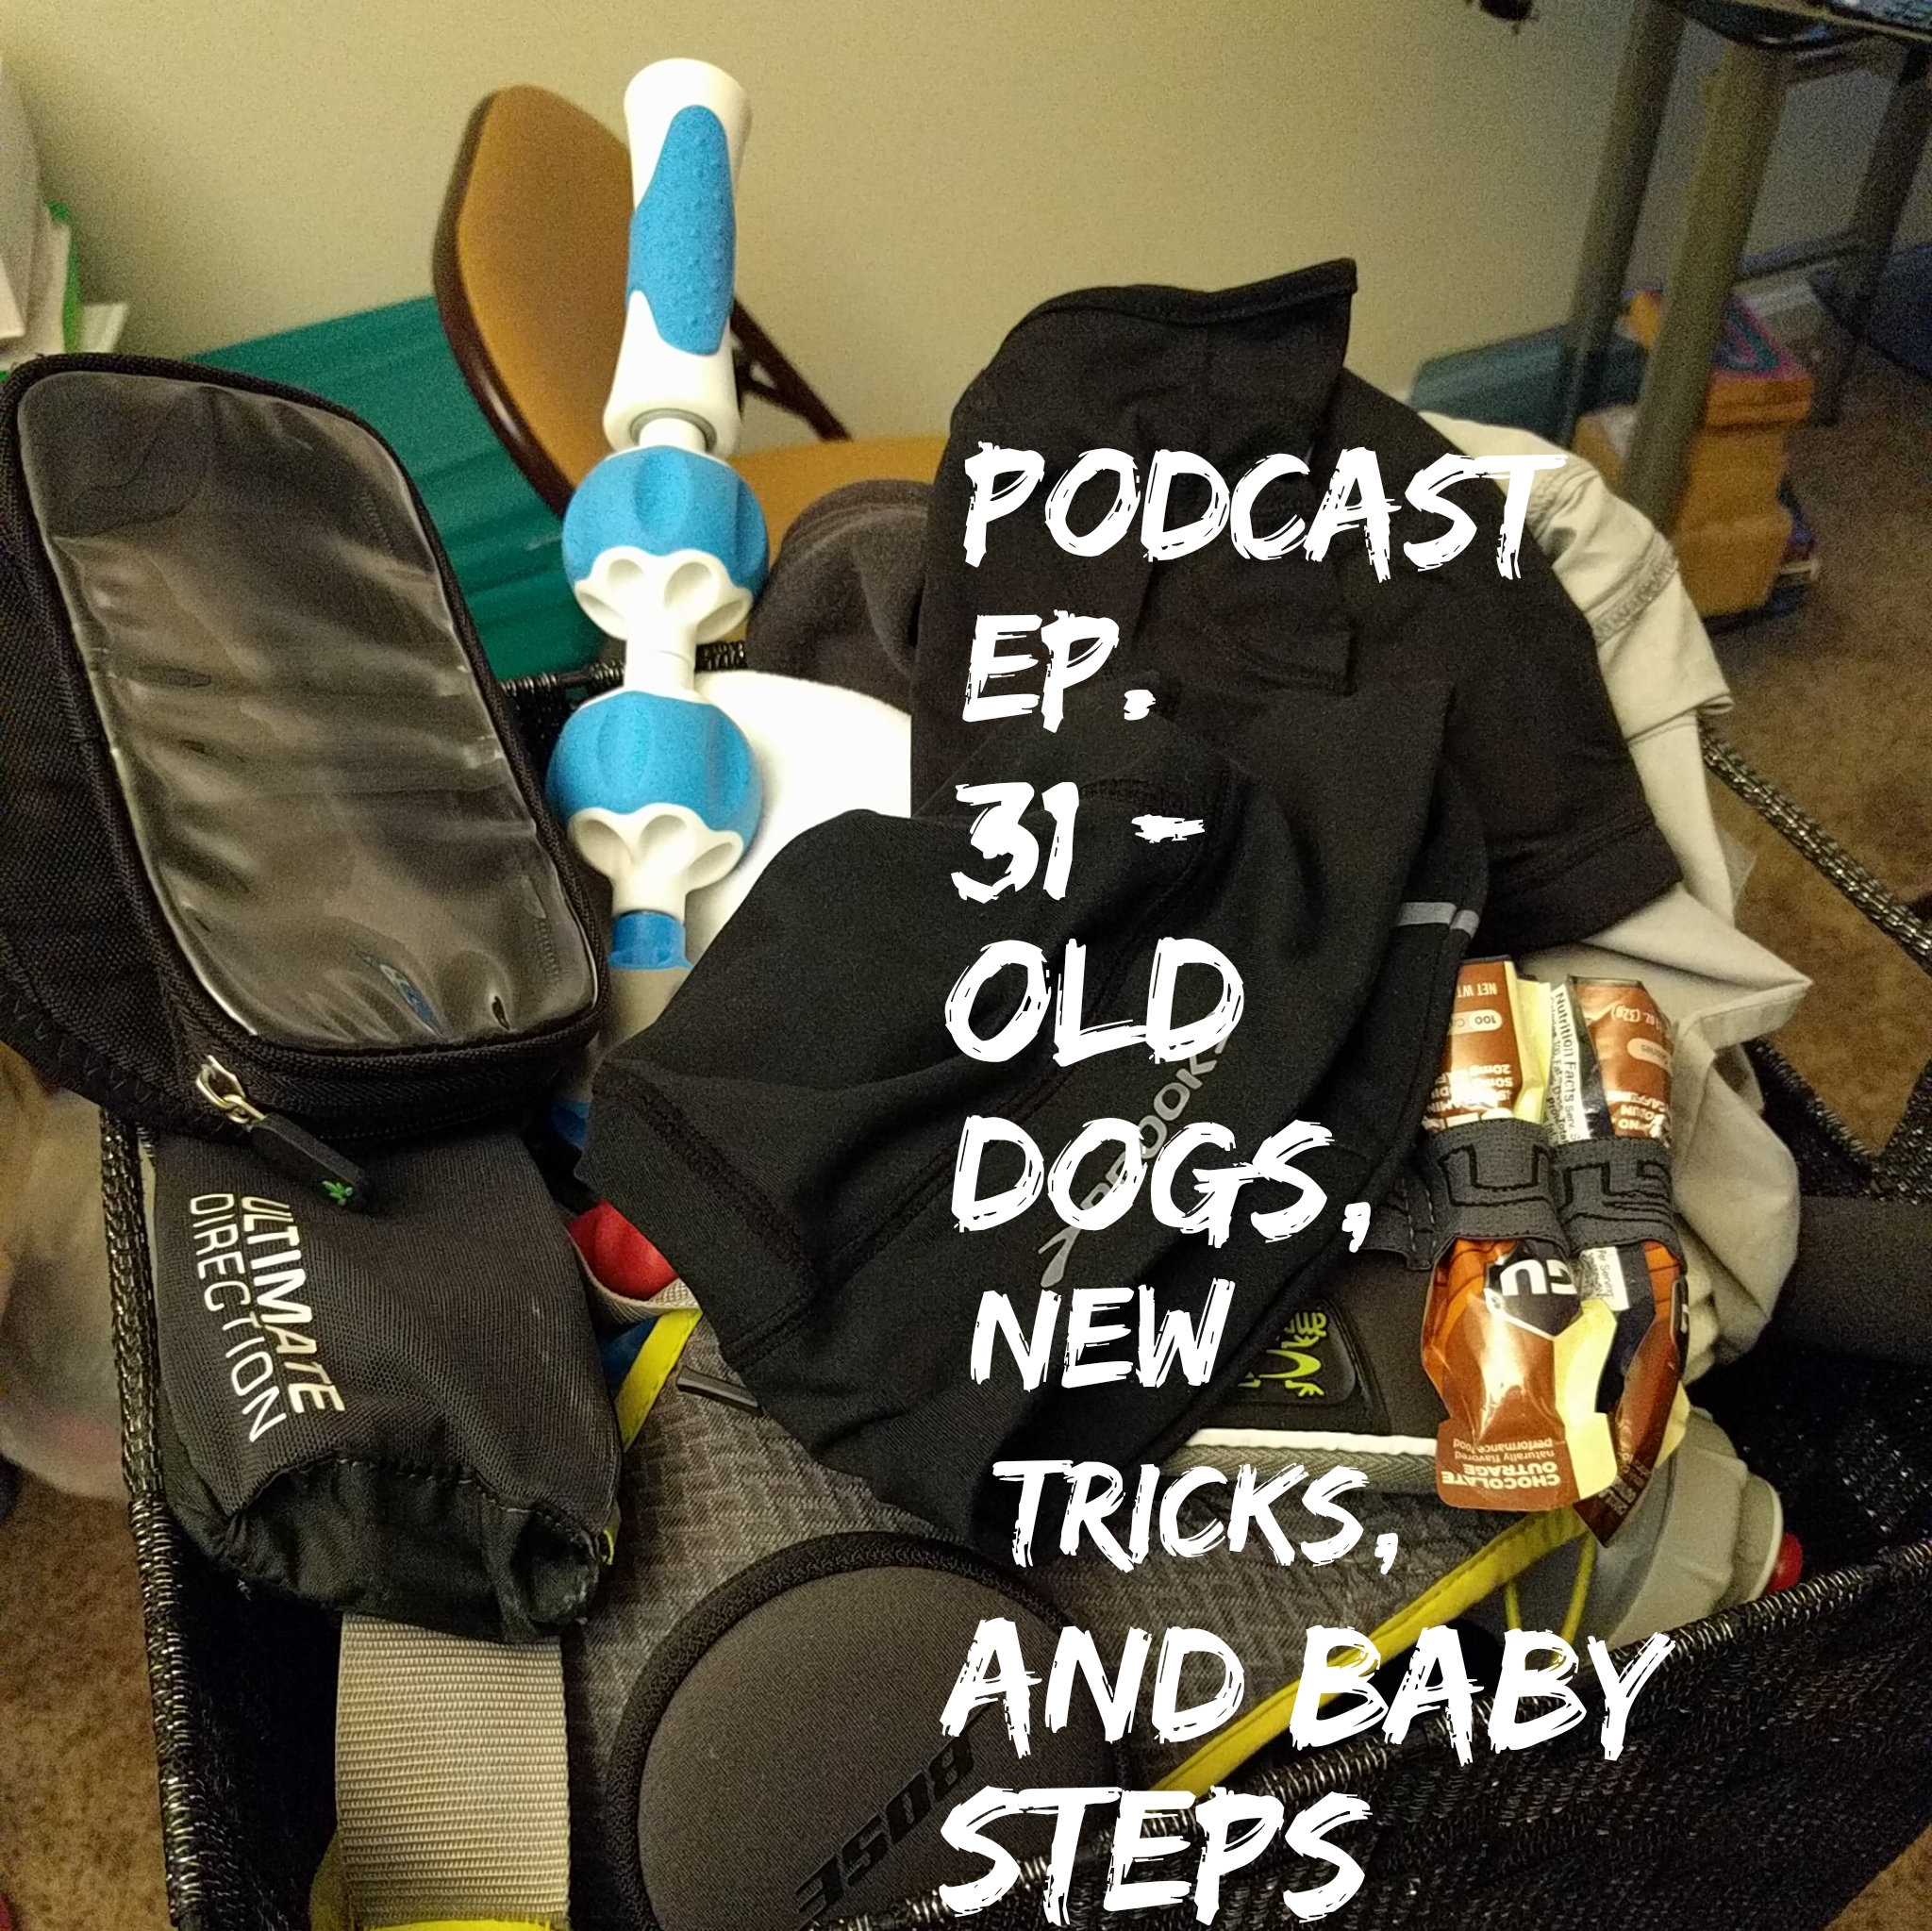 Old Dogs, New Tricks, and Baby Steps (Podcast Ep. 31)